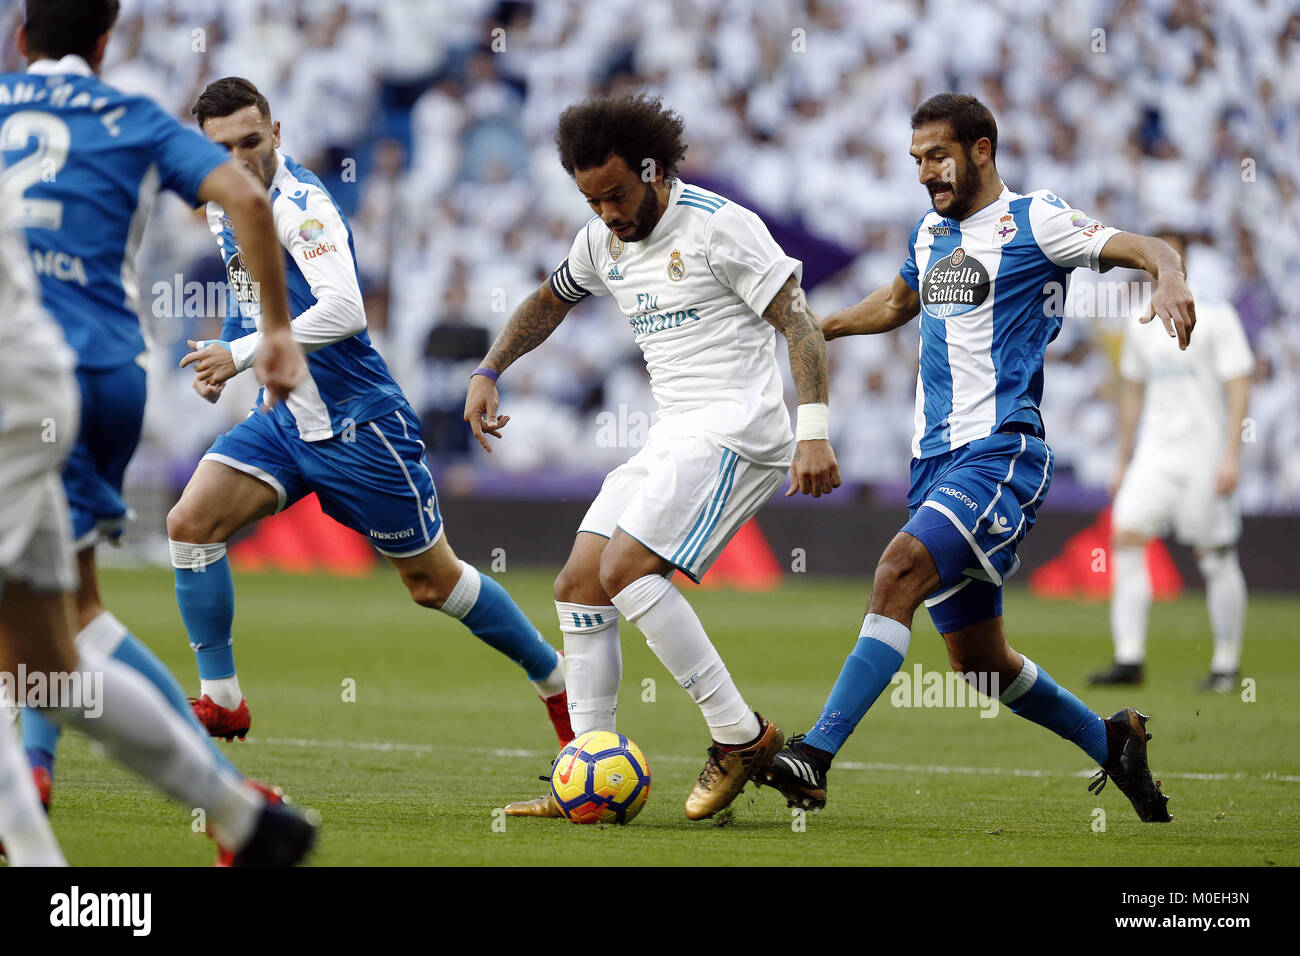 Madrid, Madrid, Spain. 21st Jan, 2018. Real Madrid player Marcelo competes for the ball with Deportivo de la CoruÃ±a player Celso Borges during the match.Real Madrid faced Deportivo de la CoruÃ±a at the Santiago Bernabeu stadium during the Spanish league game ''La Liga''. Final score Real Madrid won 7-1. Credit: Manu Reino/SOPA/ZUMA Wire/Alamy Live News Stock Photo